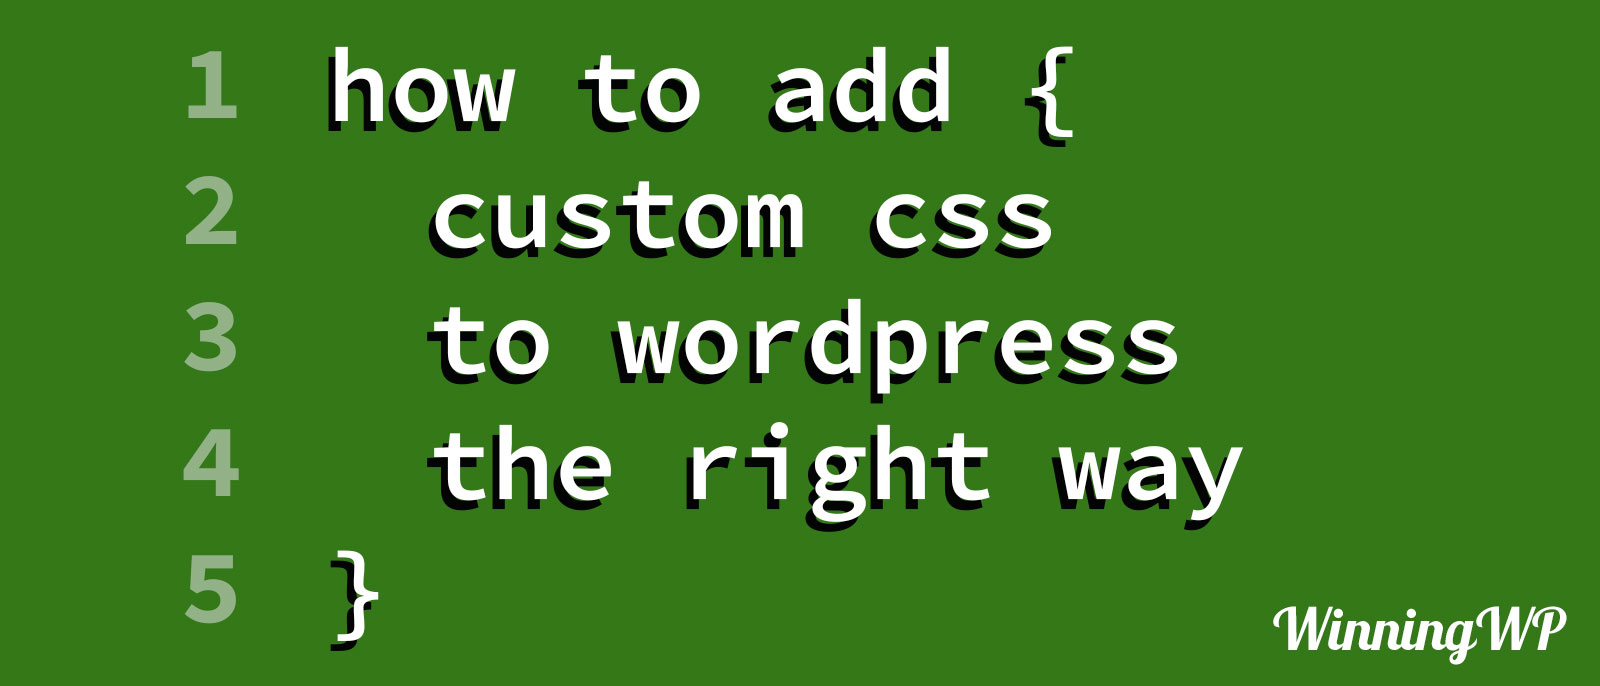 How to add CSS to WordPress